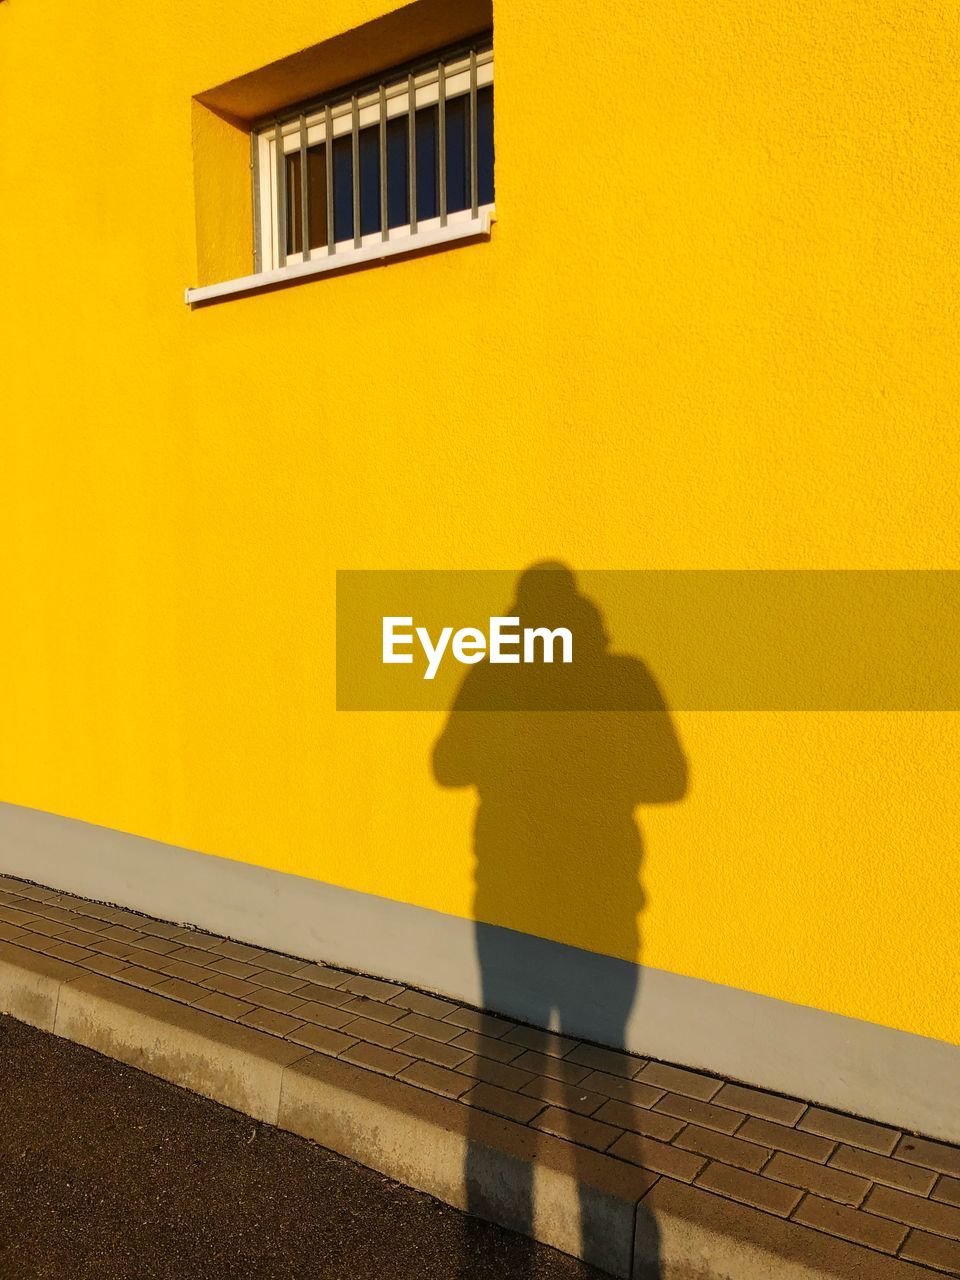 Shadow of person on yellow wall